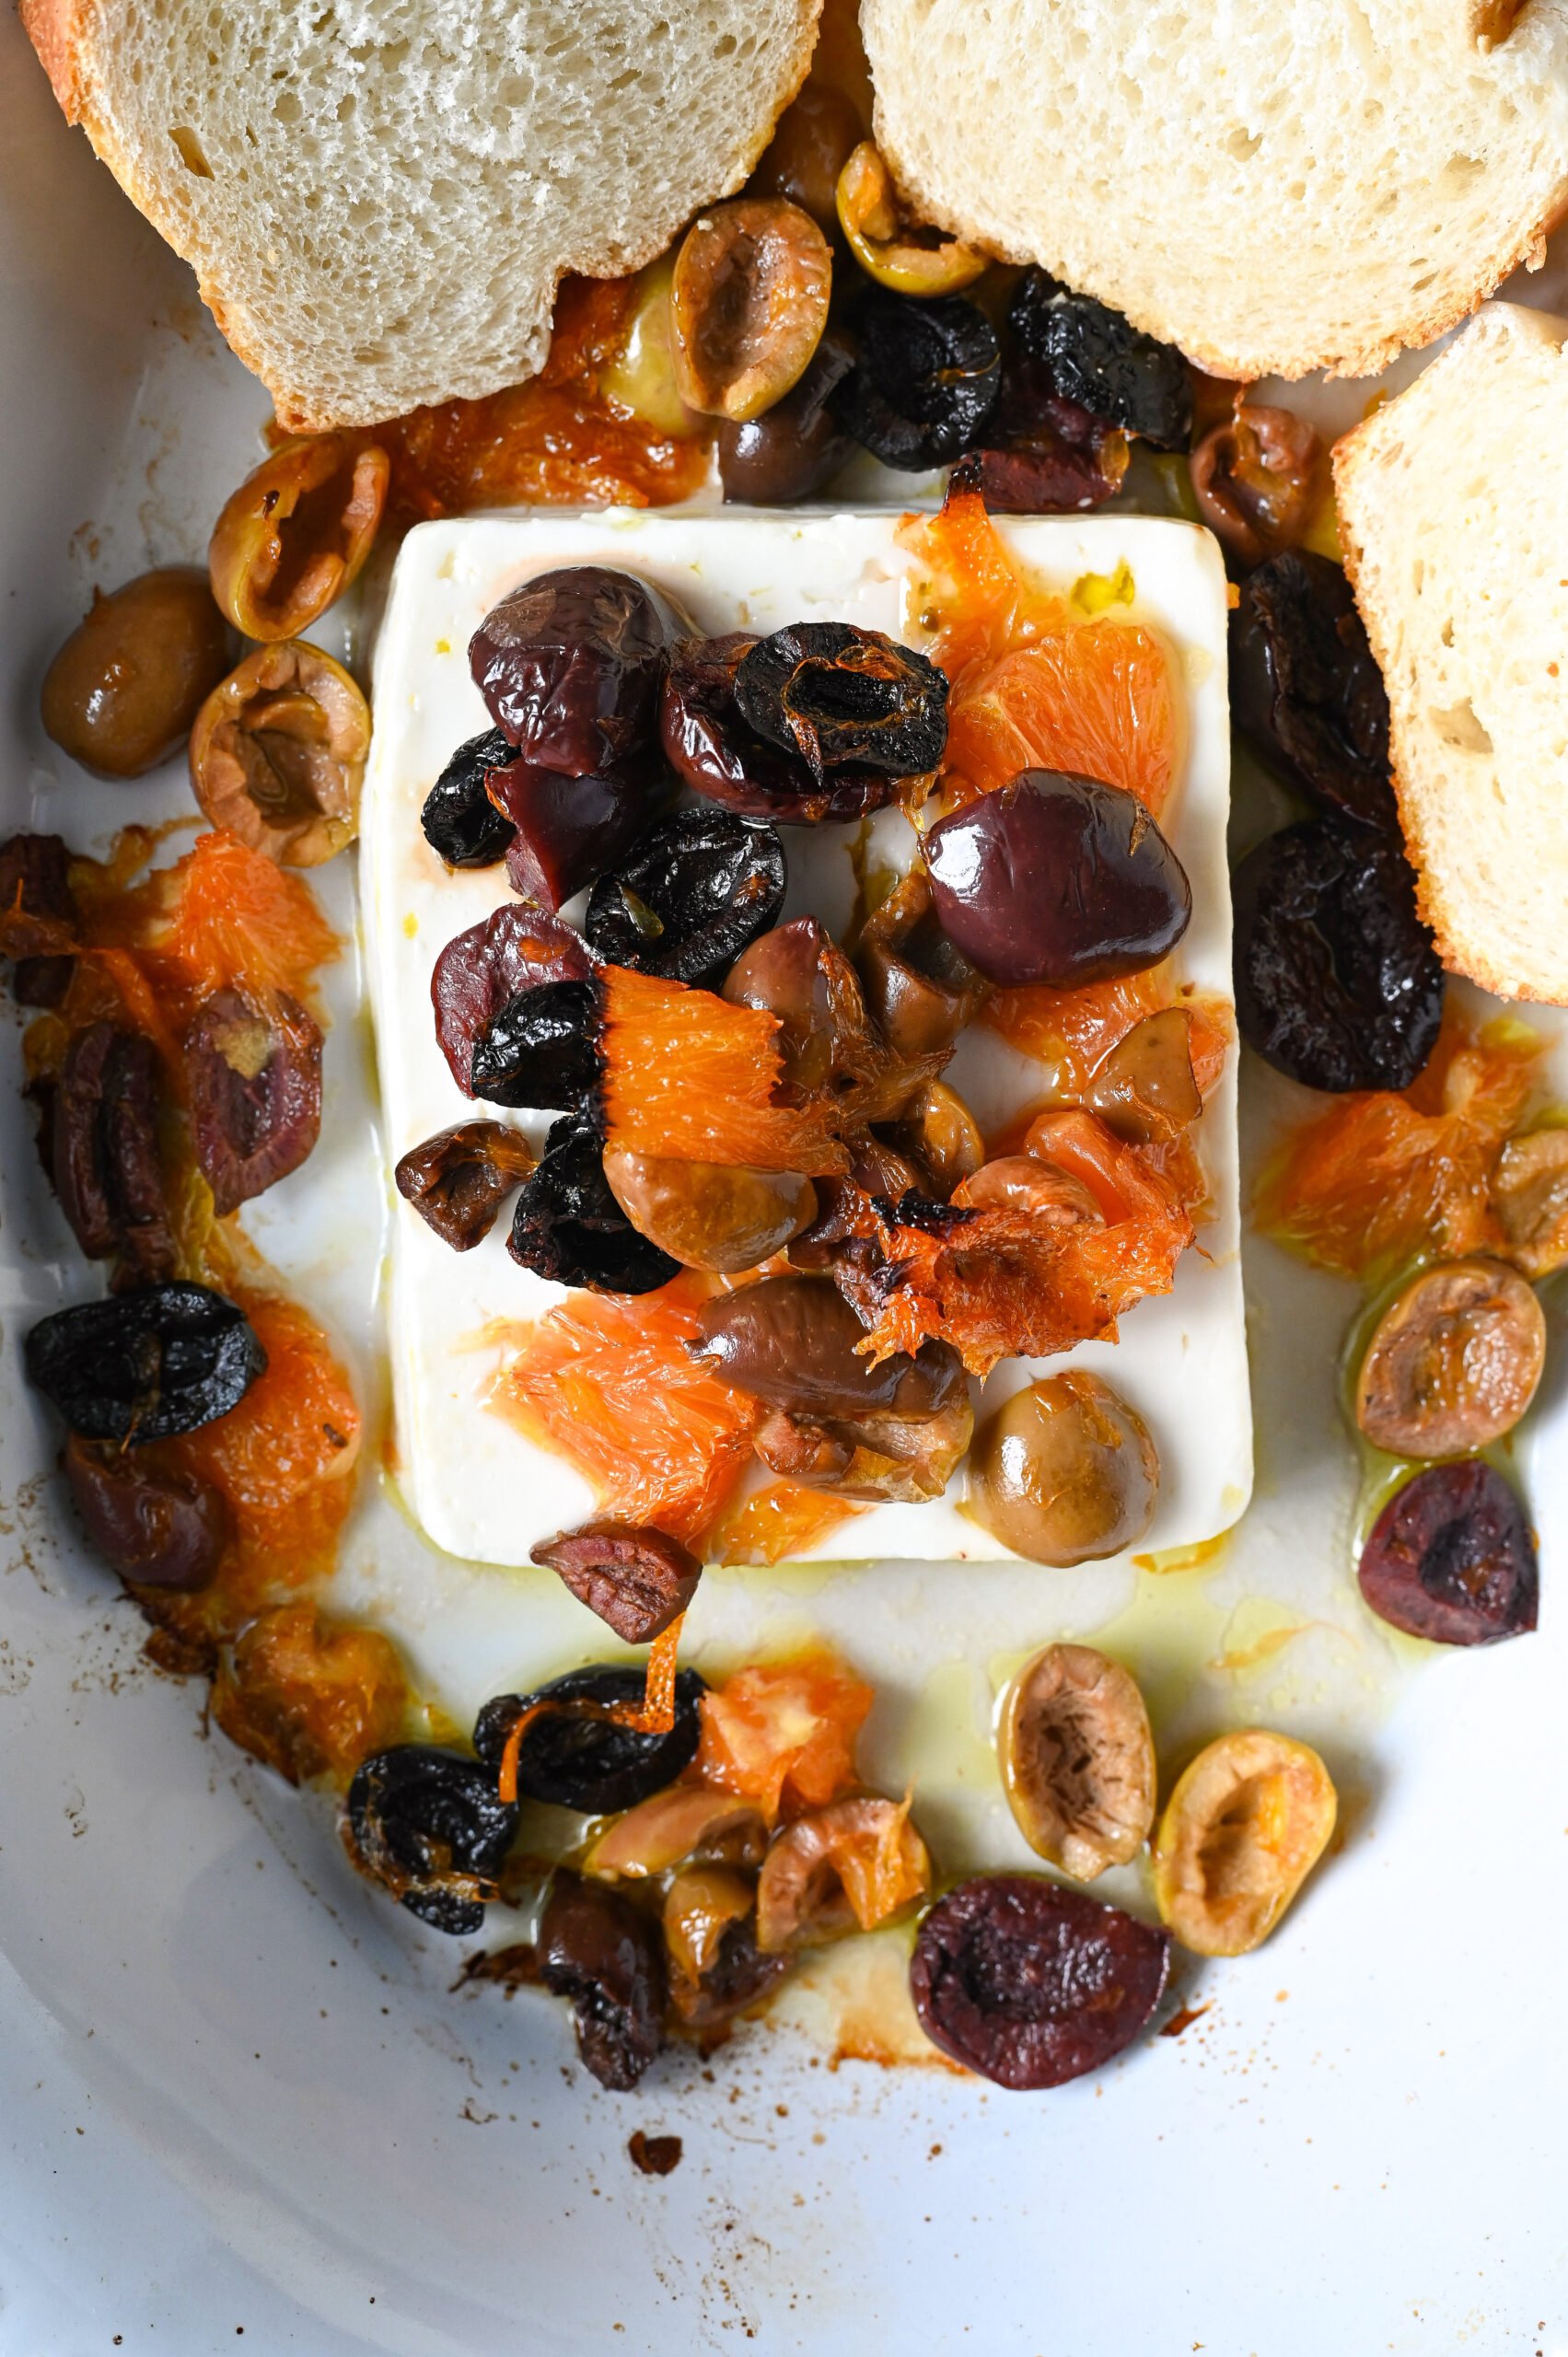 Easy Greek appetizer of baked feta with orange and olives to serve with bread or crackers.